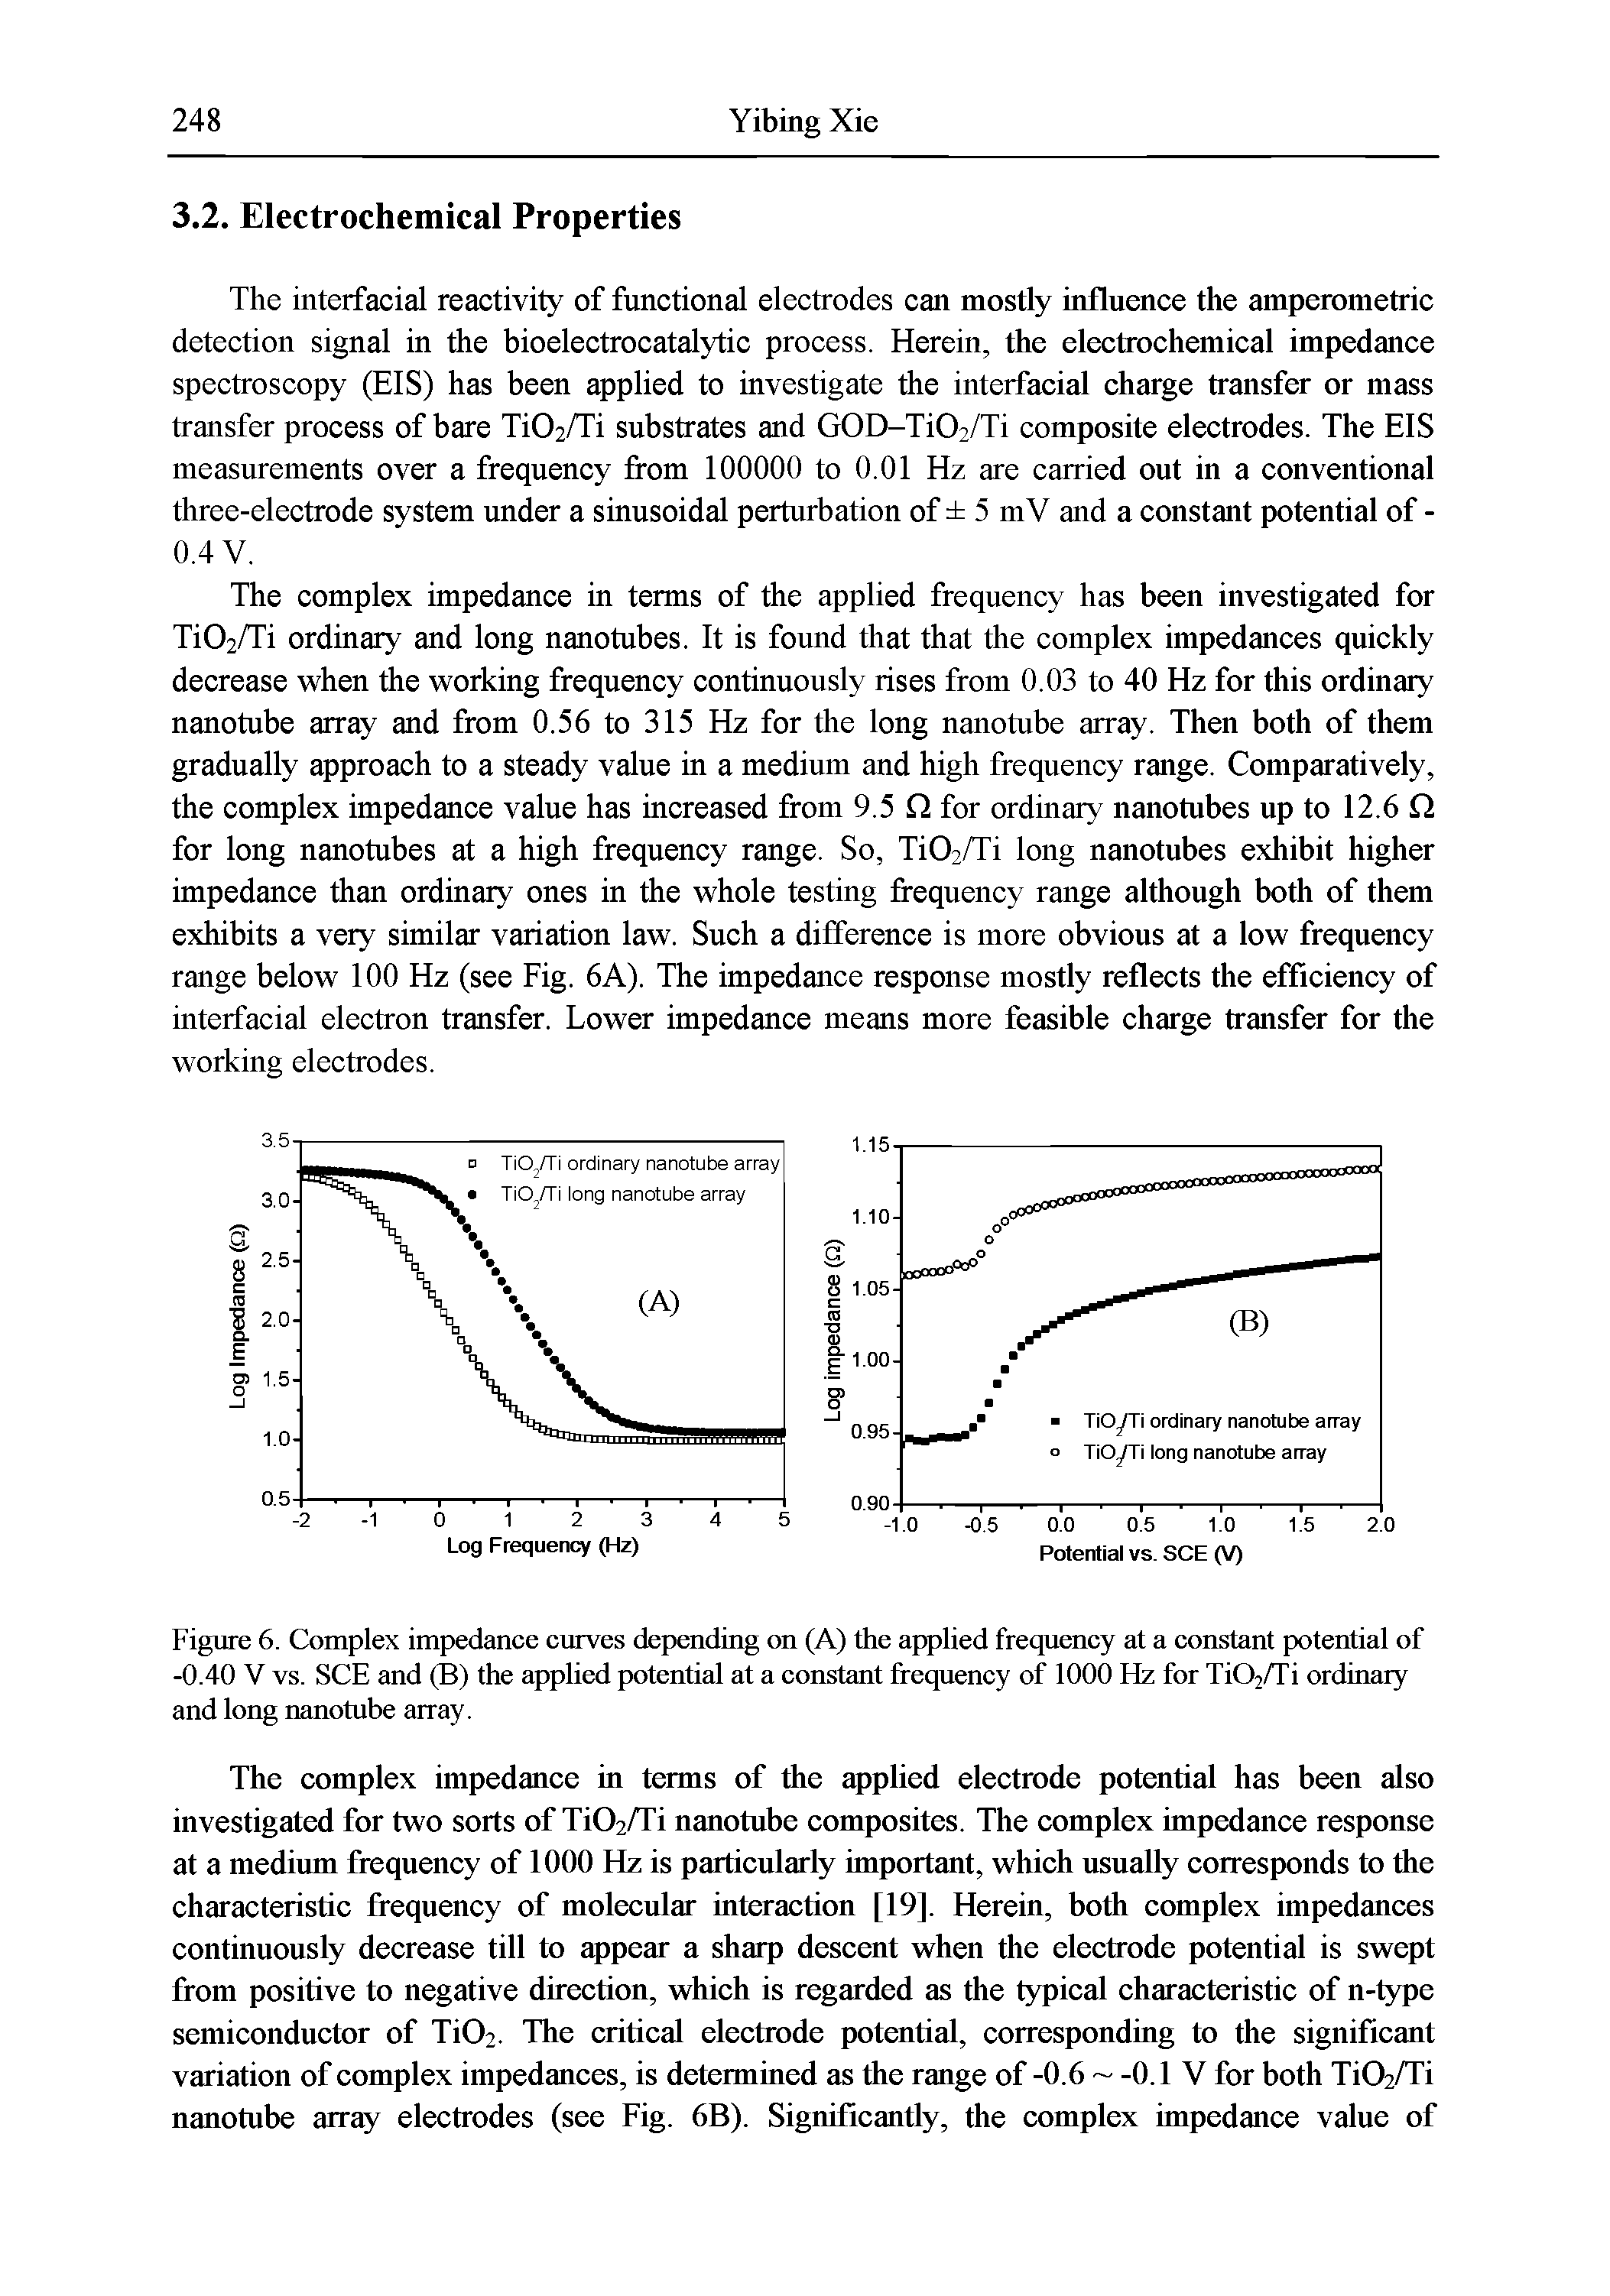 Figure 6. Complex impedance curves depending on (A) the applied frequency at a constant potential of -0.40 V vs. SCE and (B) the applied potential at a constant frequency of 1000 Hz for Ti( )2/Ti ordinary and long nanotube array.